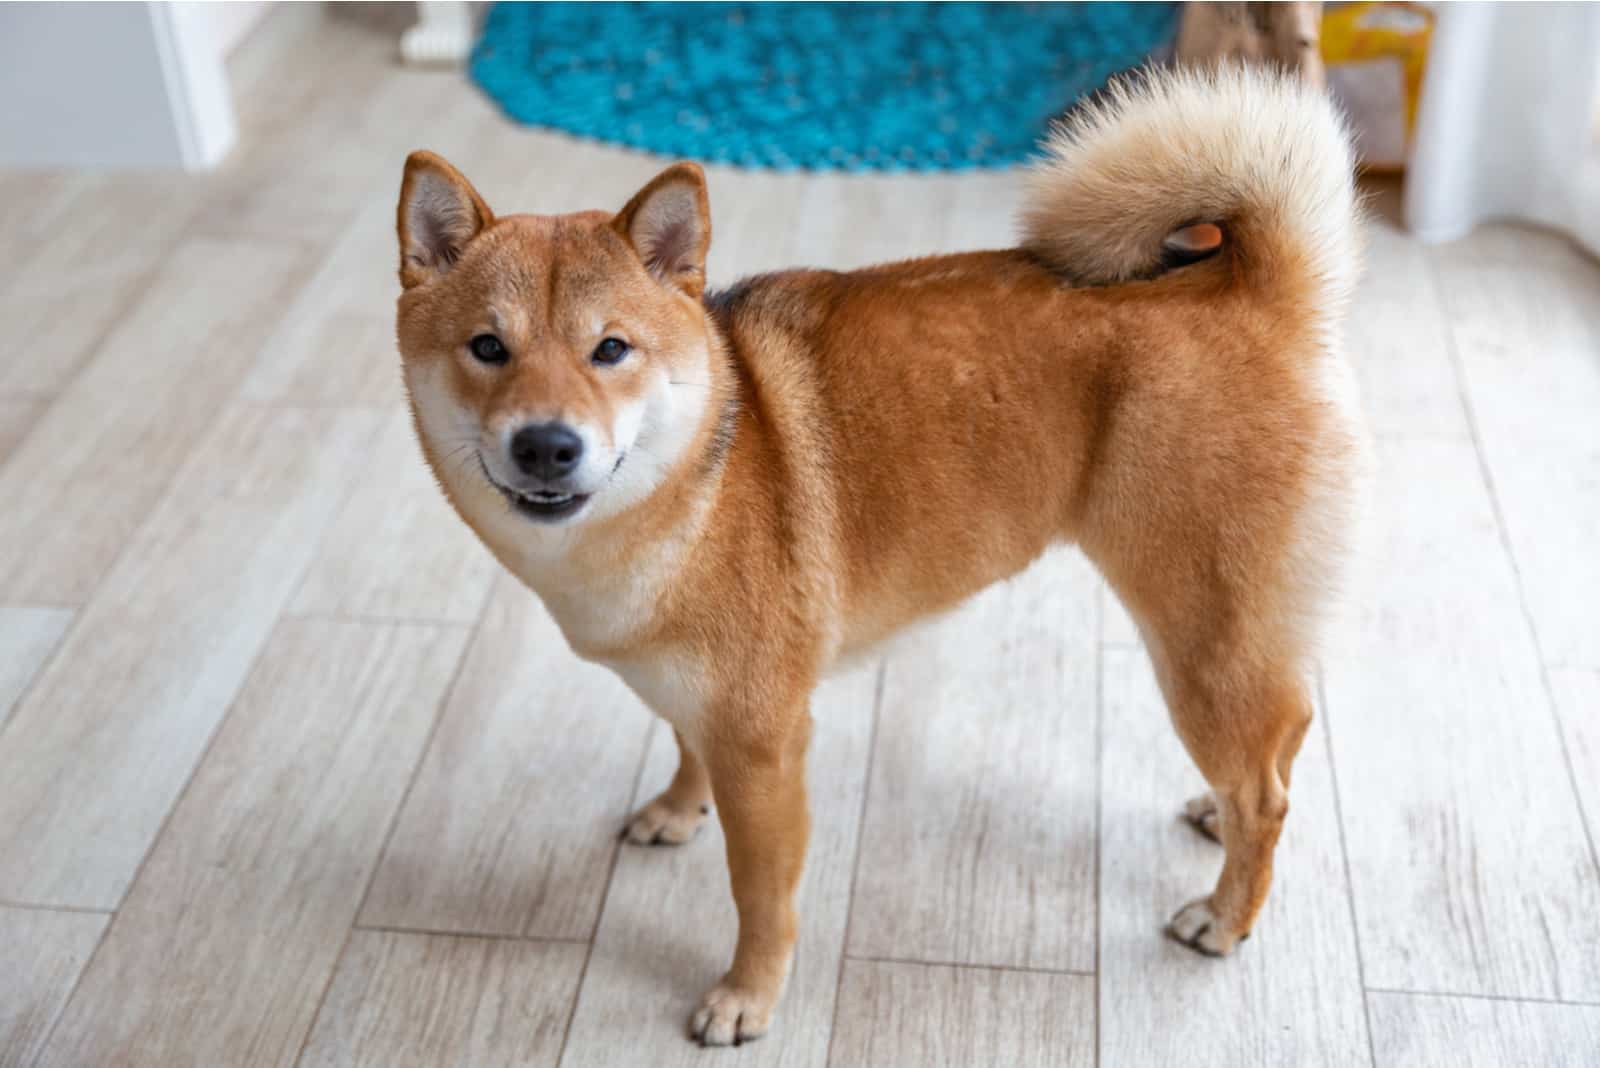 Shiba Inu stands in the tiled kitchen, staring ahead